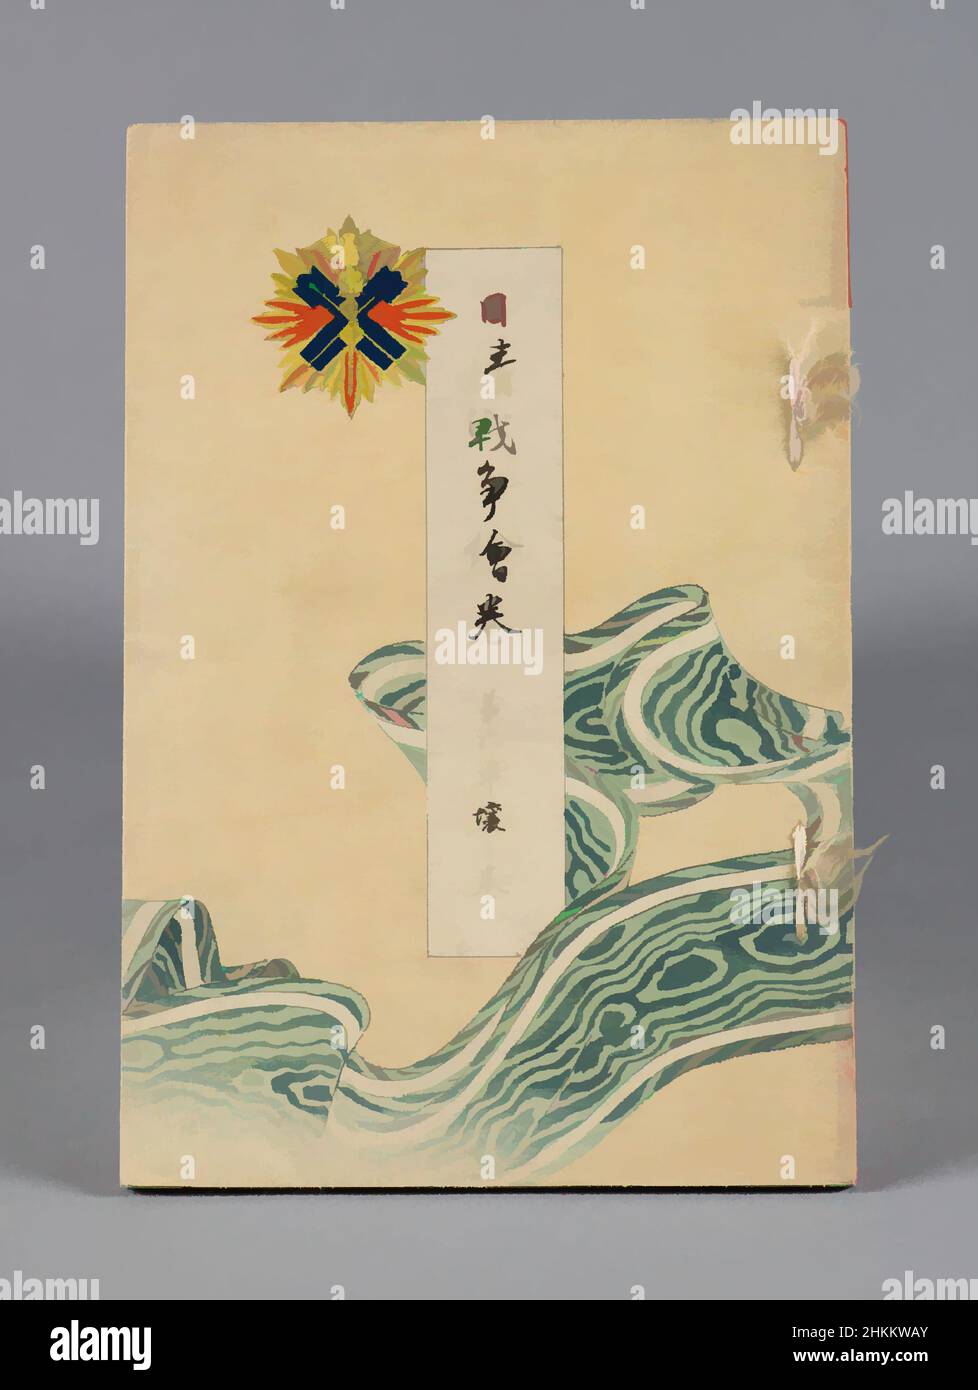 Art inspired by Nisshin sensō emaki (The Battles between Japan and China), Volume 6, Heijō no kan (Ping Yang), Suzuki Kason, Japanese, 1860-1919, Meiji period, 1868-1912, Shun'yōdō, 1895, Woodblock-printed book, Tokyo, Japan, Asia, Books & manuscripts, each volume: 9 1/2 × 6 7/16 × 1/4, Classic works modernized by Artotop with a splash of modernity. Shapes, color and value, eye-catching visual impact on art. Emotions through freedom of artworks in a contemporary way. A timeless message pursuing a wildly creative new direction. Artists turning to the digital medium and creating the Artotop NFT Stock Photo